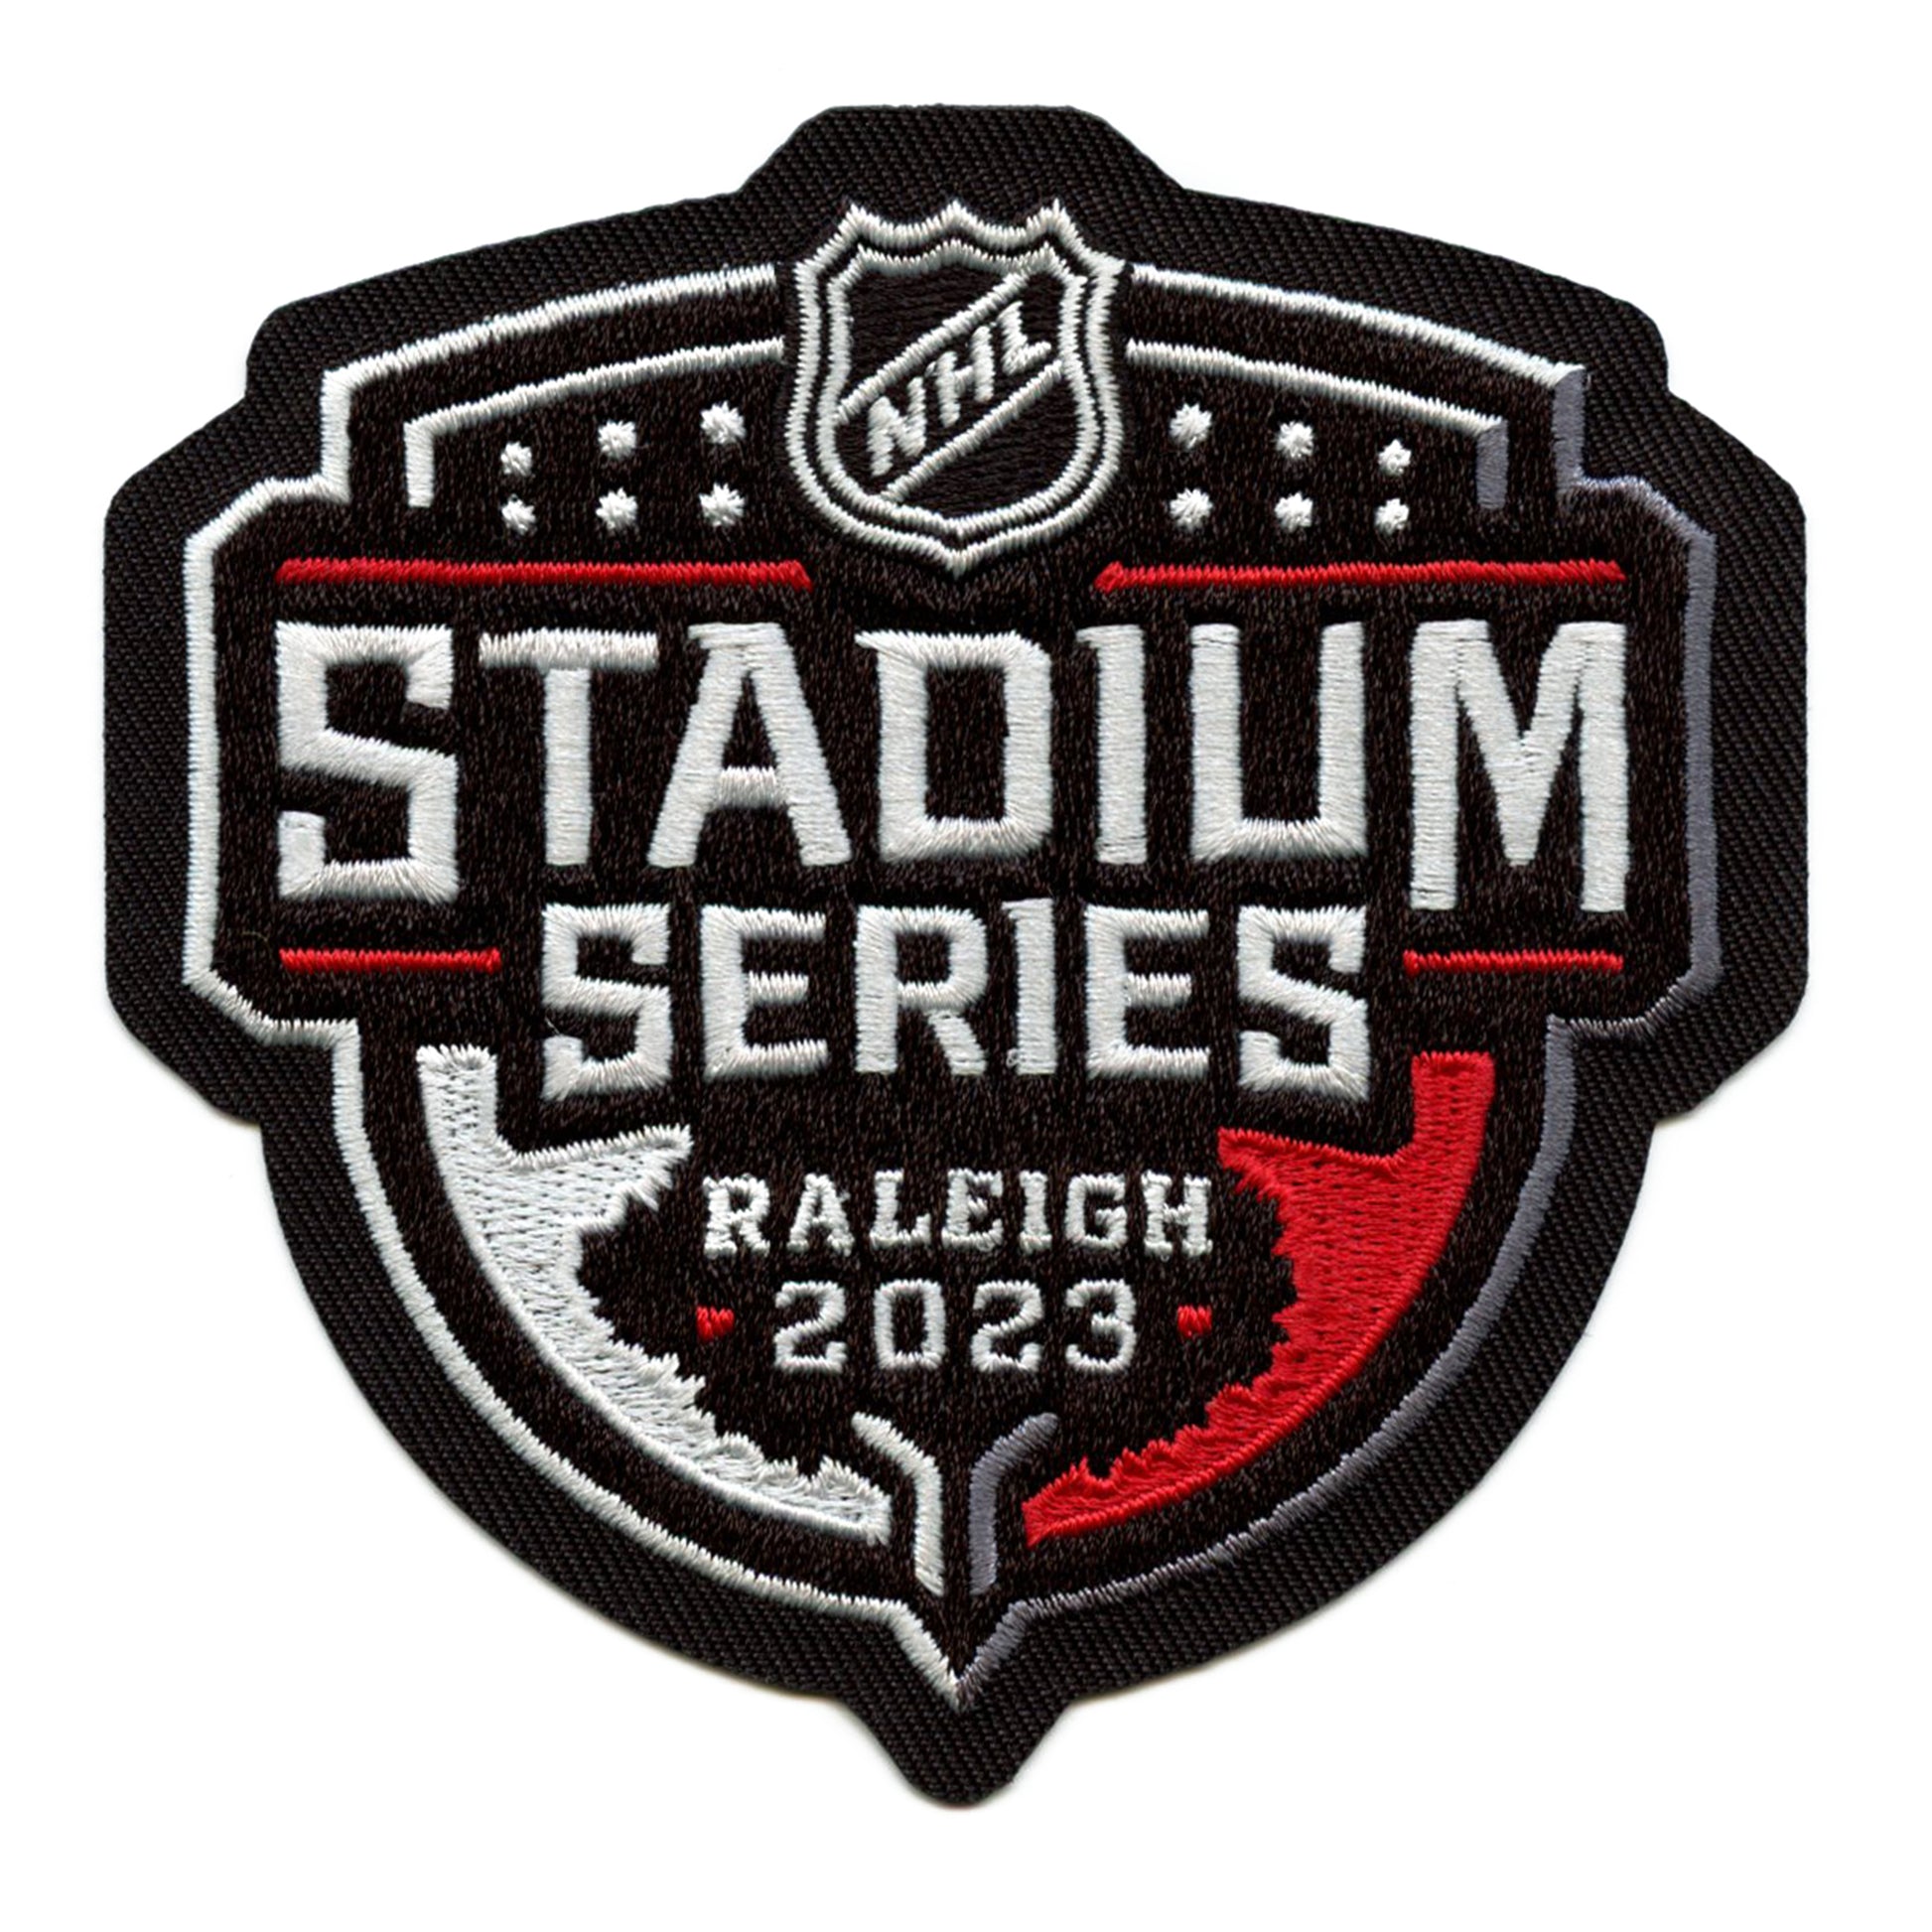 Stadium series patch $12 after tax : r/canes